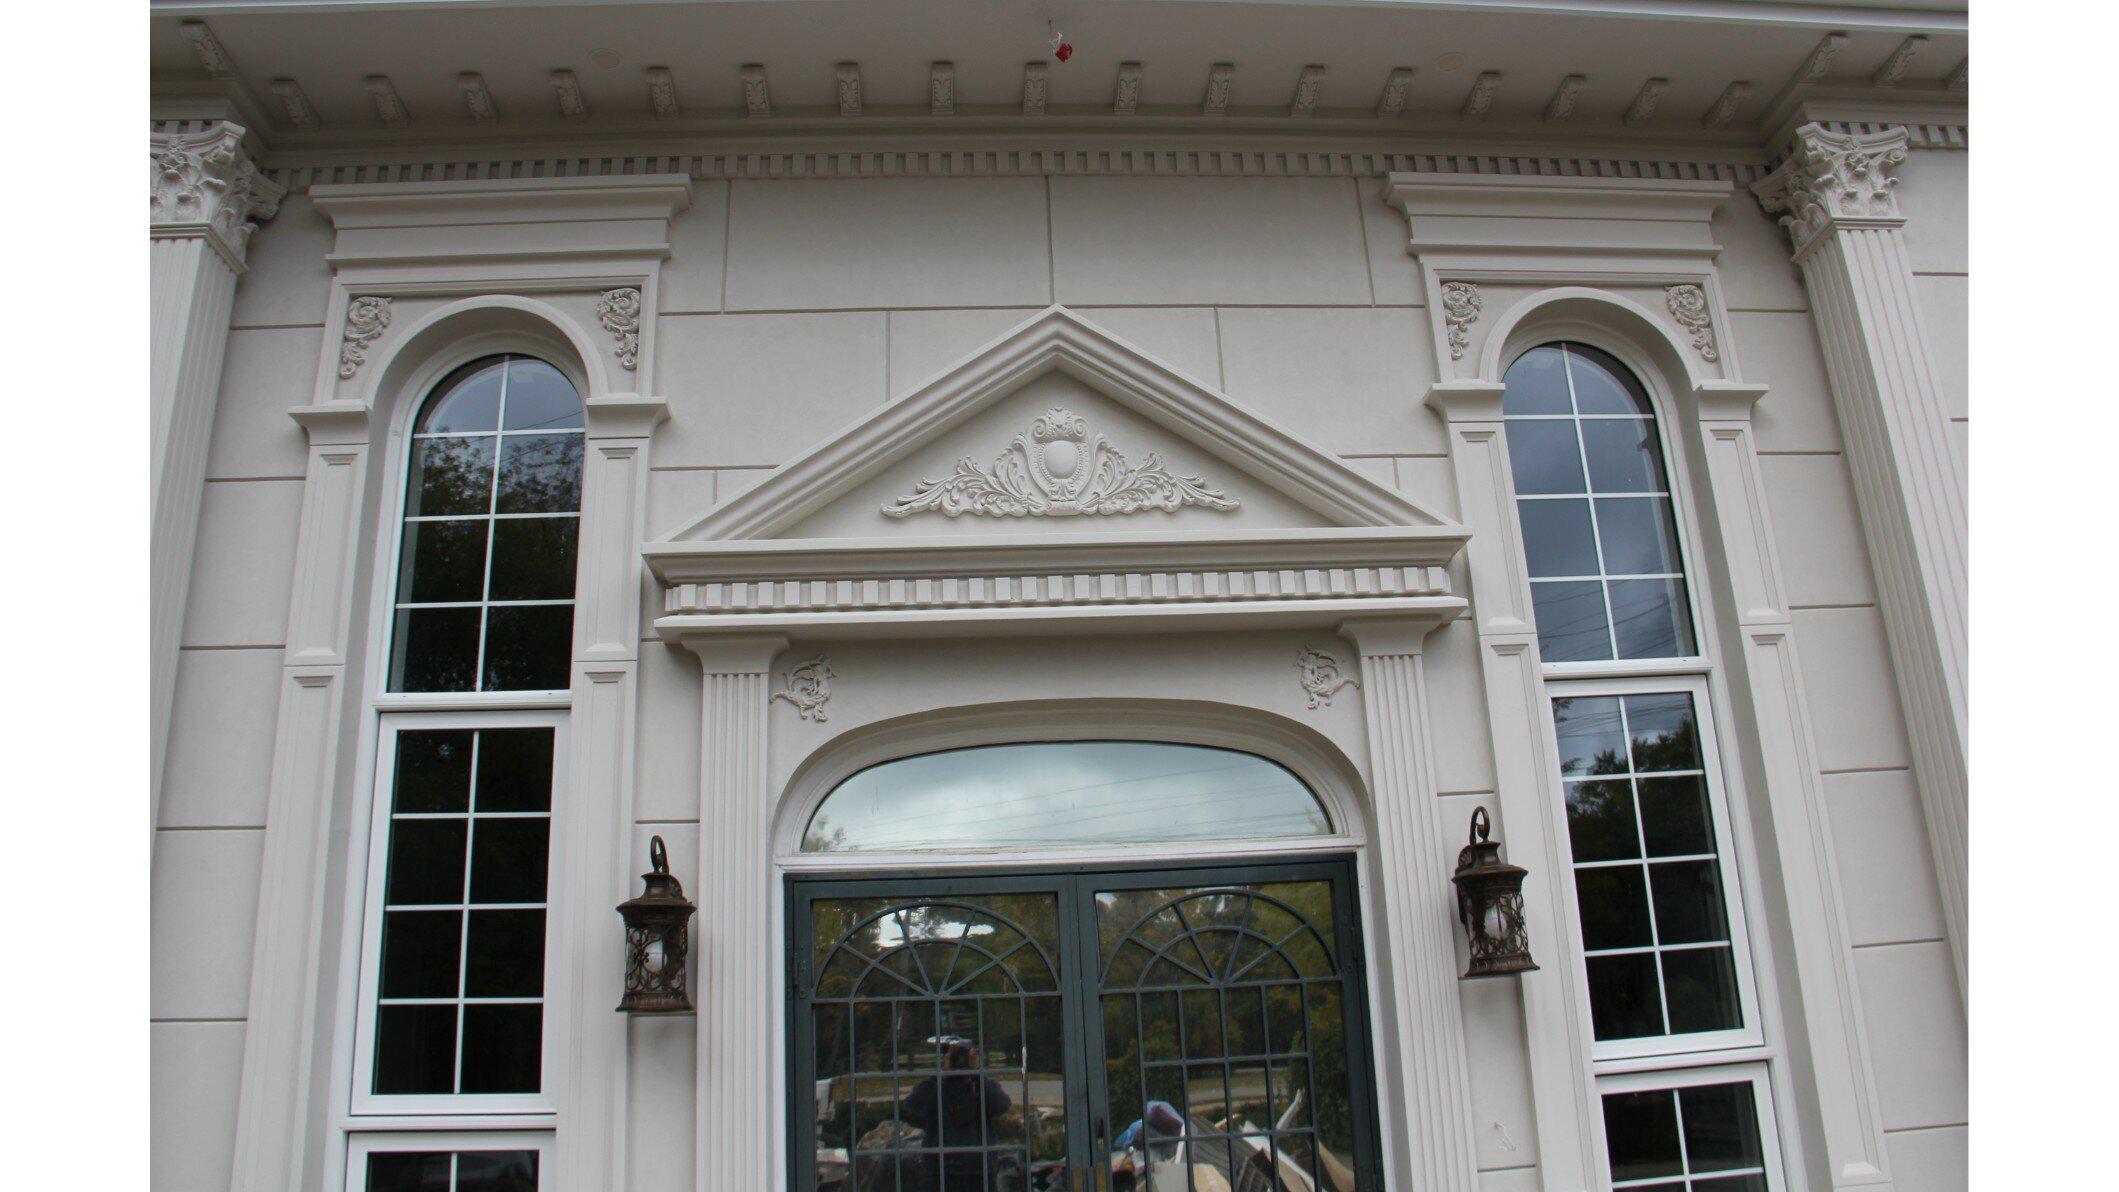 METKAM CONSTRUCTION STUCCO AND WALLS SYSTEMS INC. in Toronto